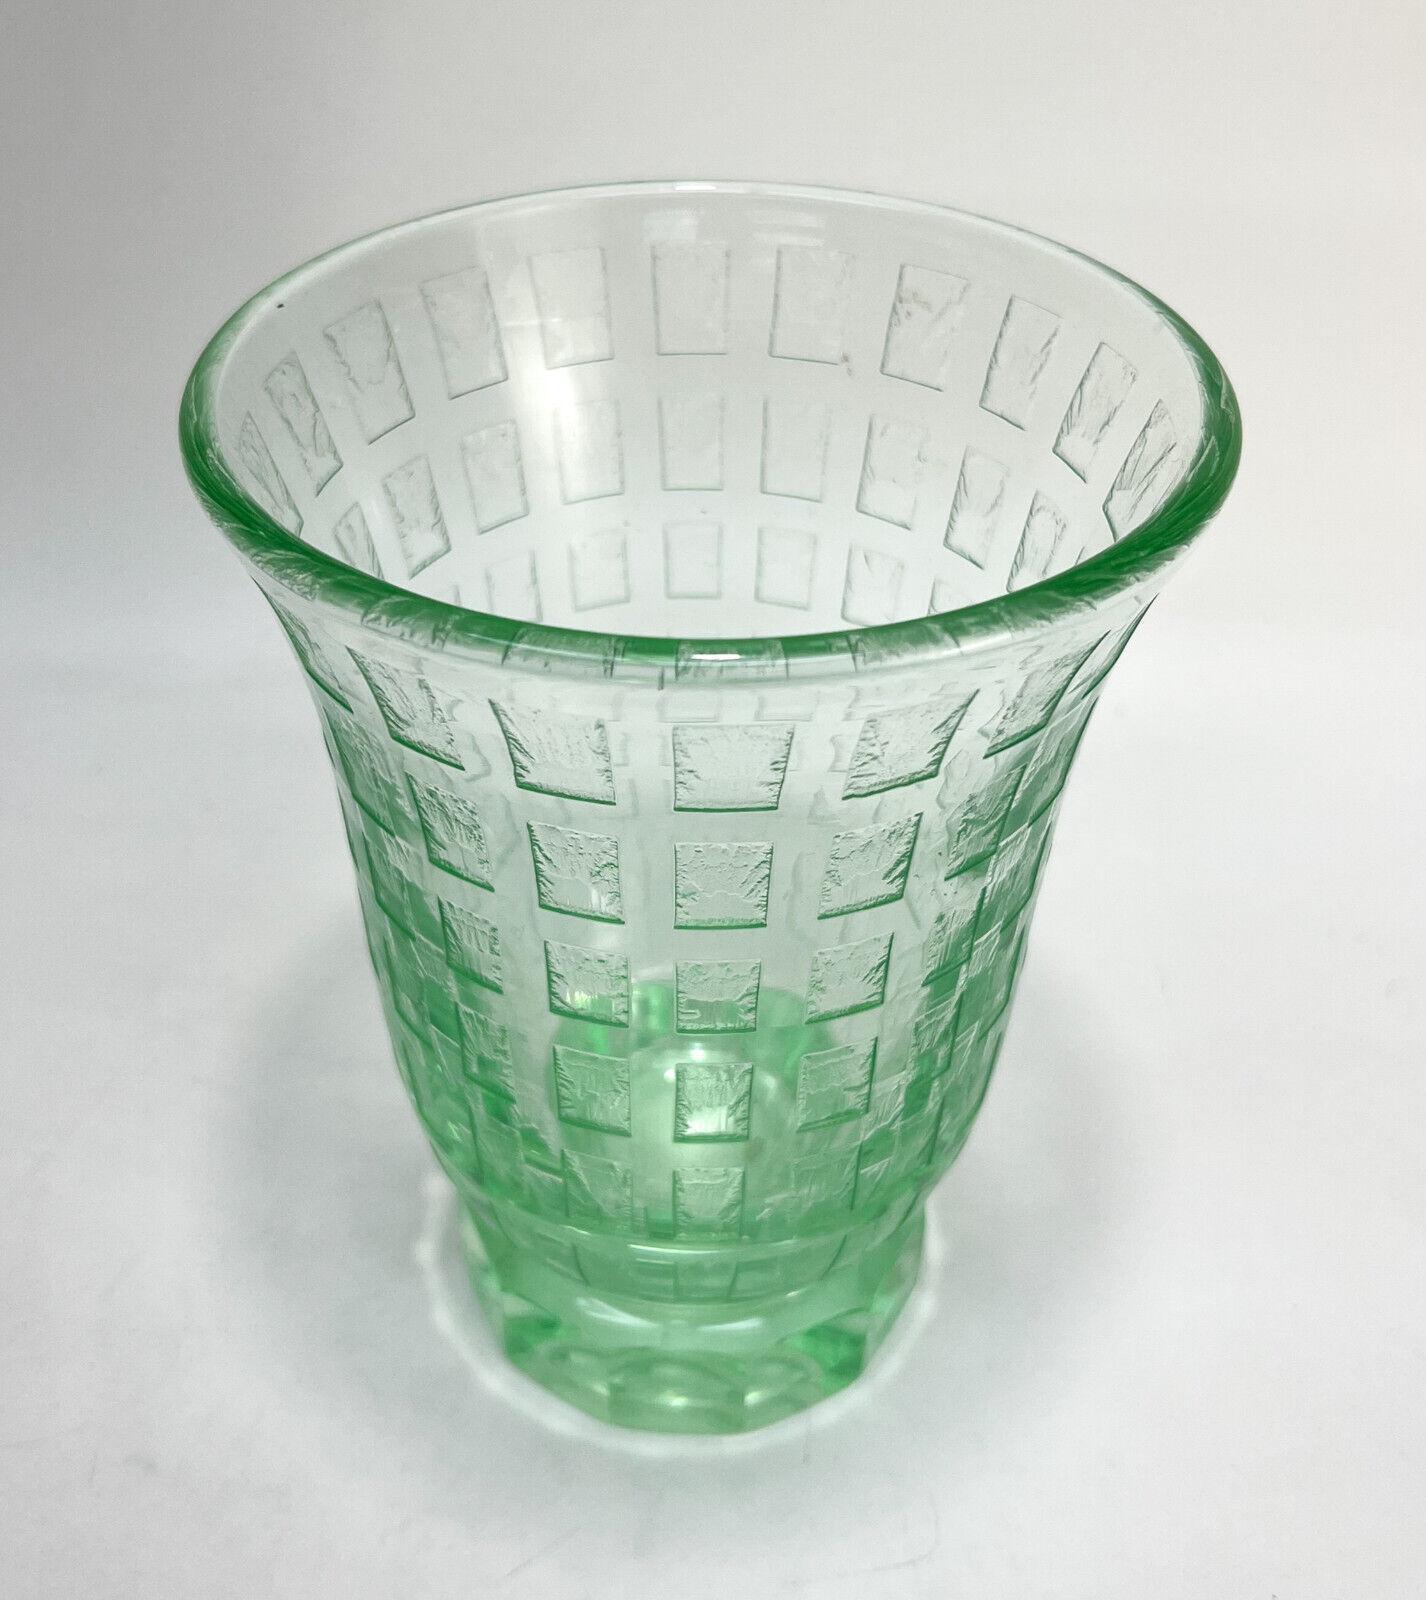 Daum Nancy France green acid etched art glass footed vase, Signed

Daum Nancy France Art Deco acid etched and engraved green vase. Repeating rectangle pattern to exterior. Signed Daum Nancy France along lower edge with polished